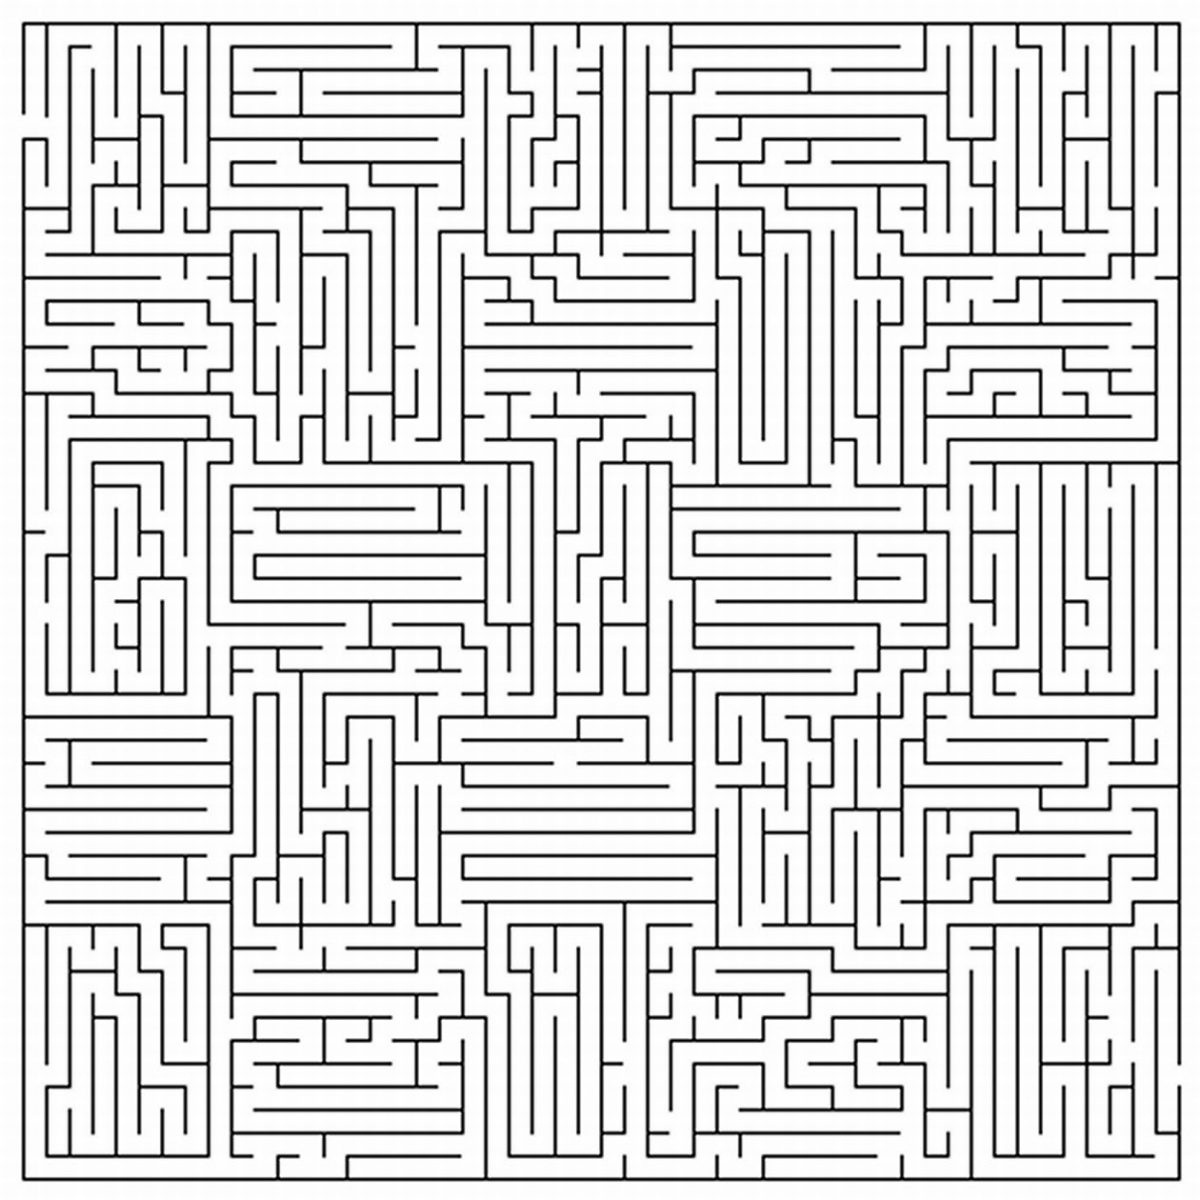 Free Printable Mazes For Kids, Toddlers &amp; Adults - Free Printable Mazes